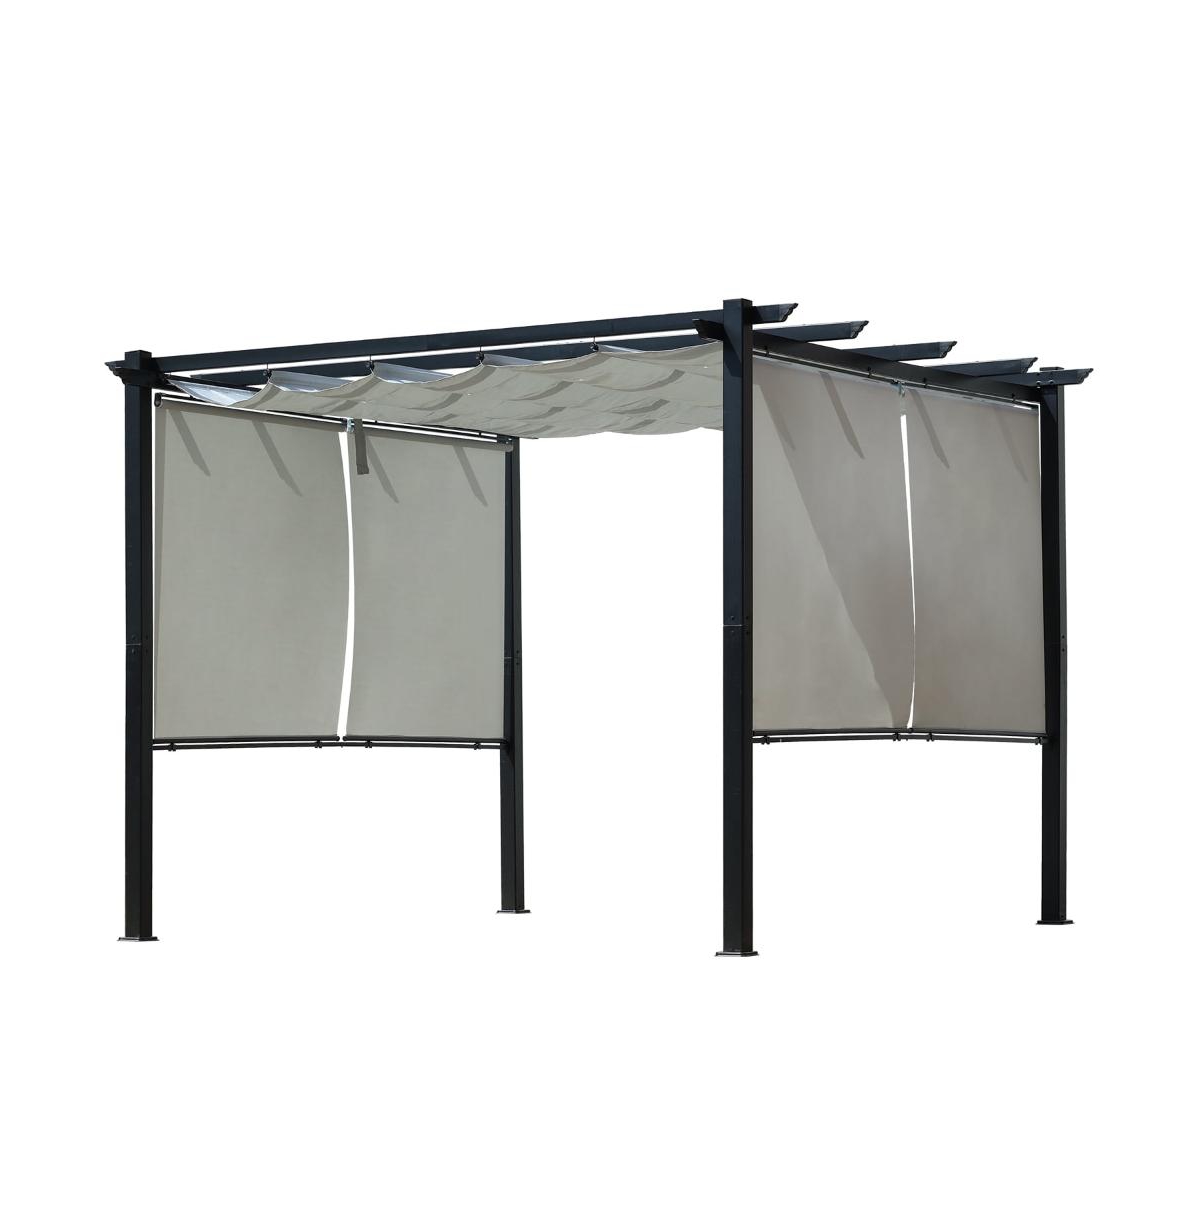 10 x 10 ft Outdoor Pergola with Retractable Canopy 4 Pieces Patio Sun Shade Shelter - Light Gray - Grey